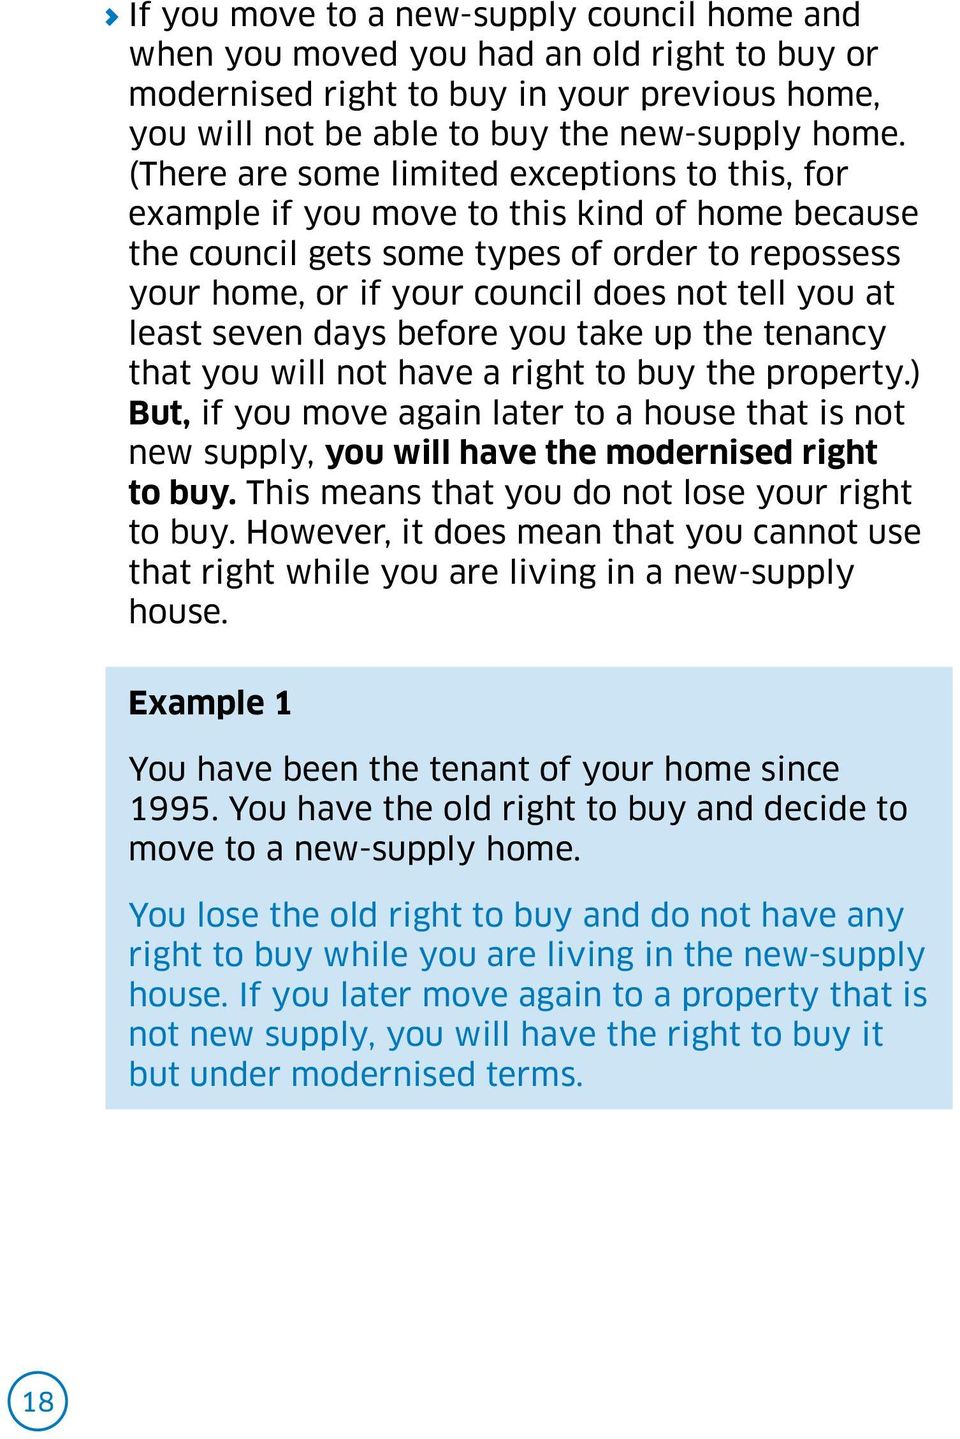 least seven days before you take up the tenancy that you will not have a right to buy the property.